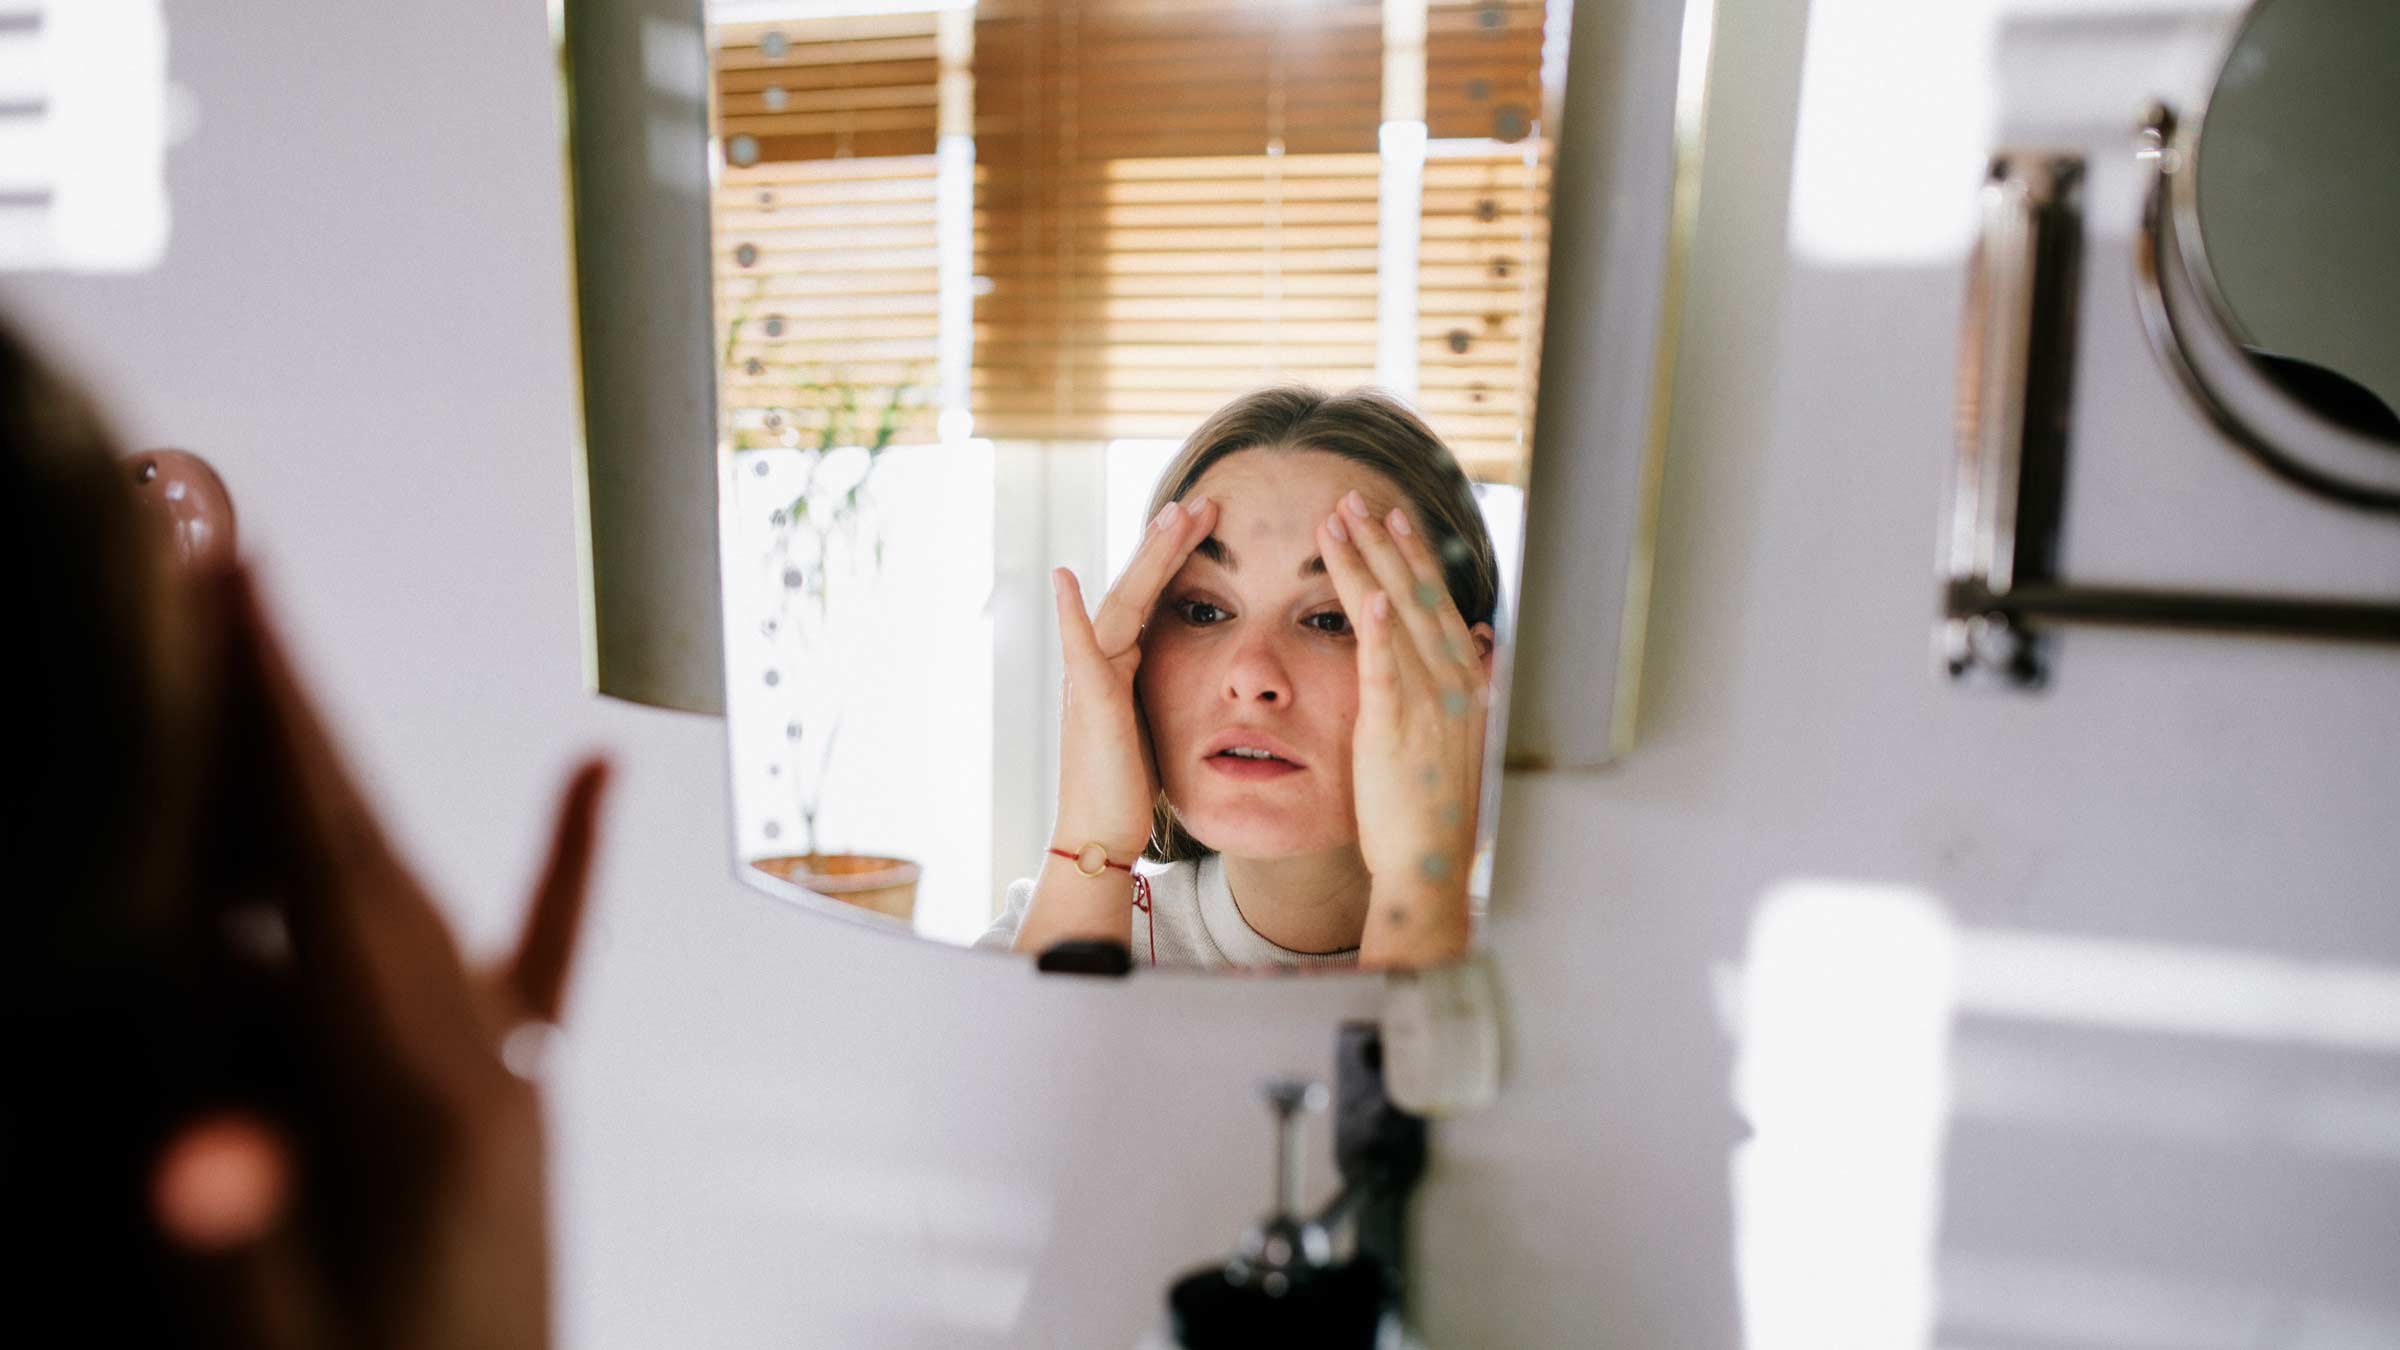 Woman looking in bathroom mirror after cleaning her face